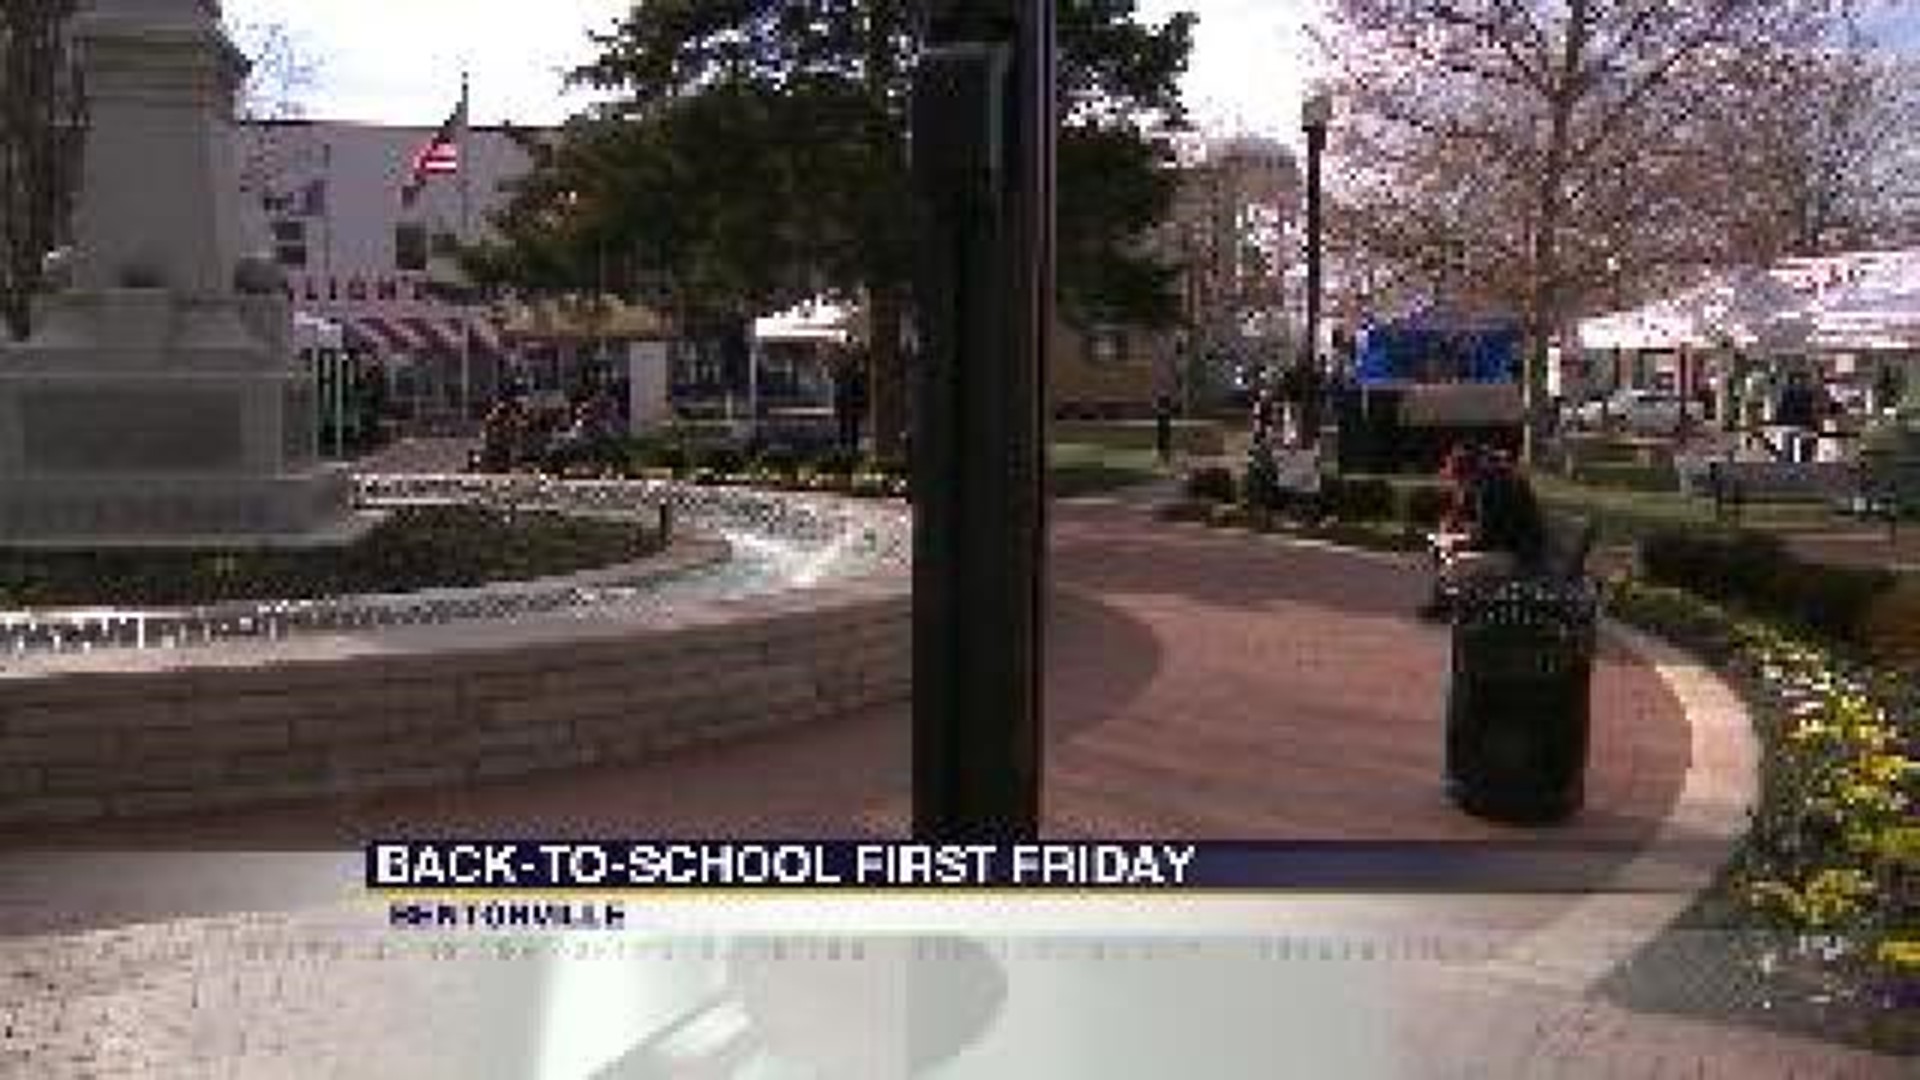 Bentonville First Friday Hosts Back-to-School Bash